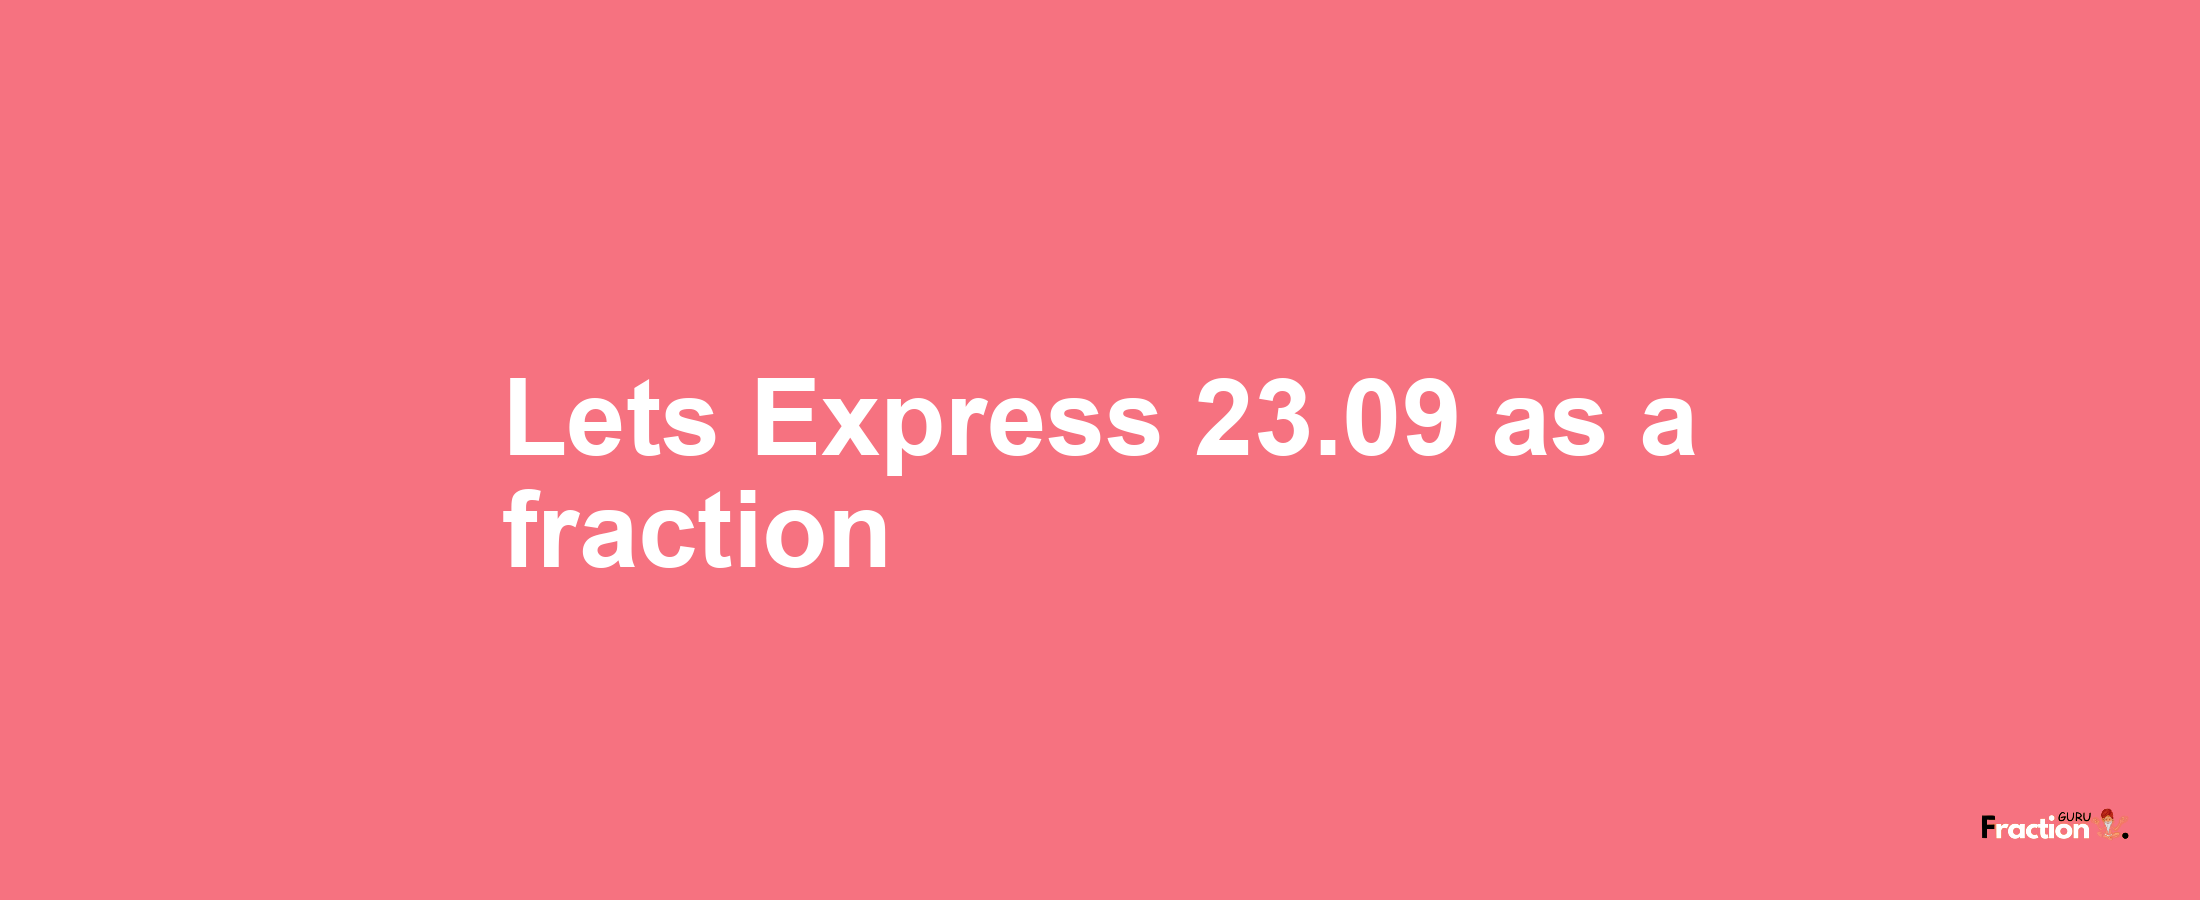 Lets Express 23.09 as afraction